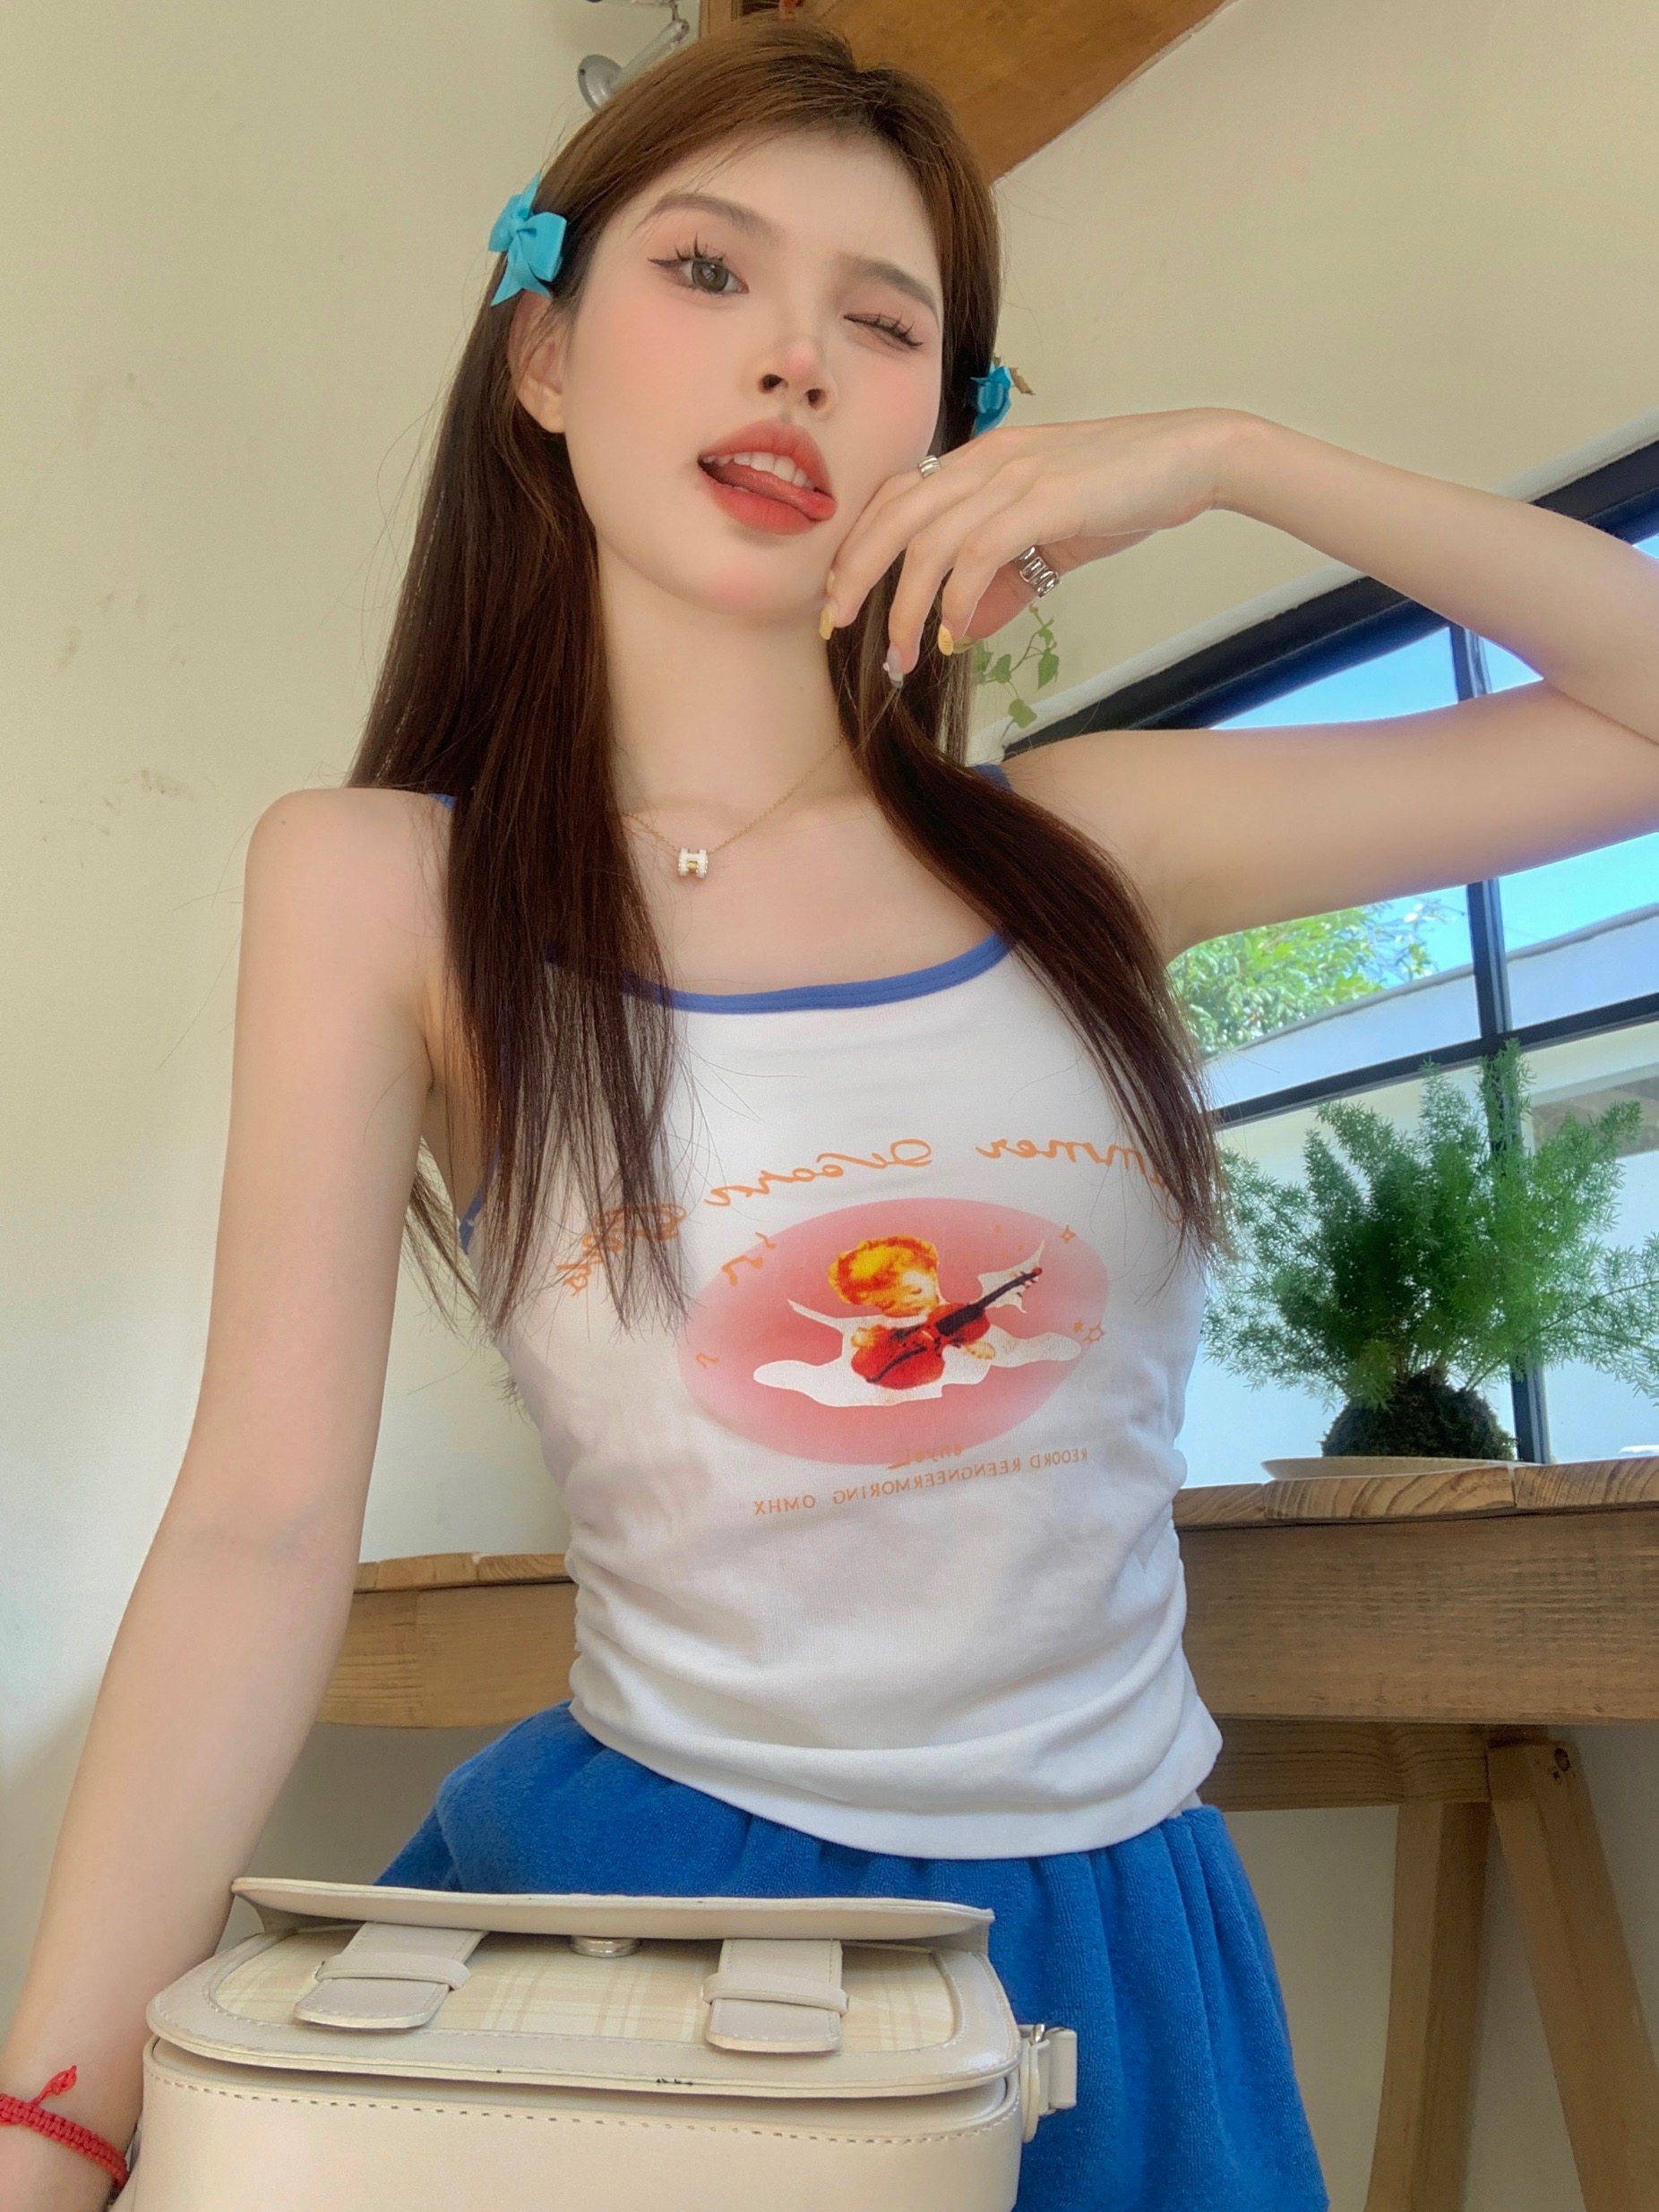 Real shot spring autumn summer bottoming shirt sleeveless camisole hot girl color matching pure desire little angel short top